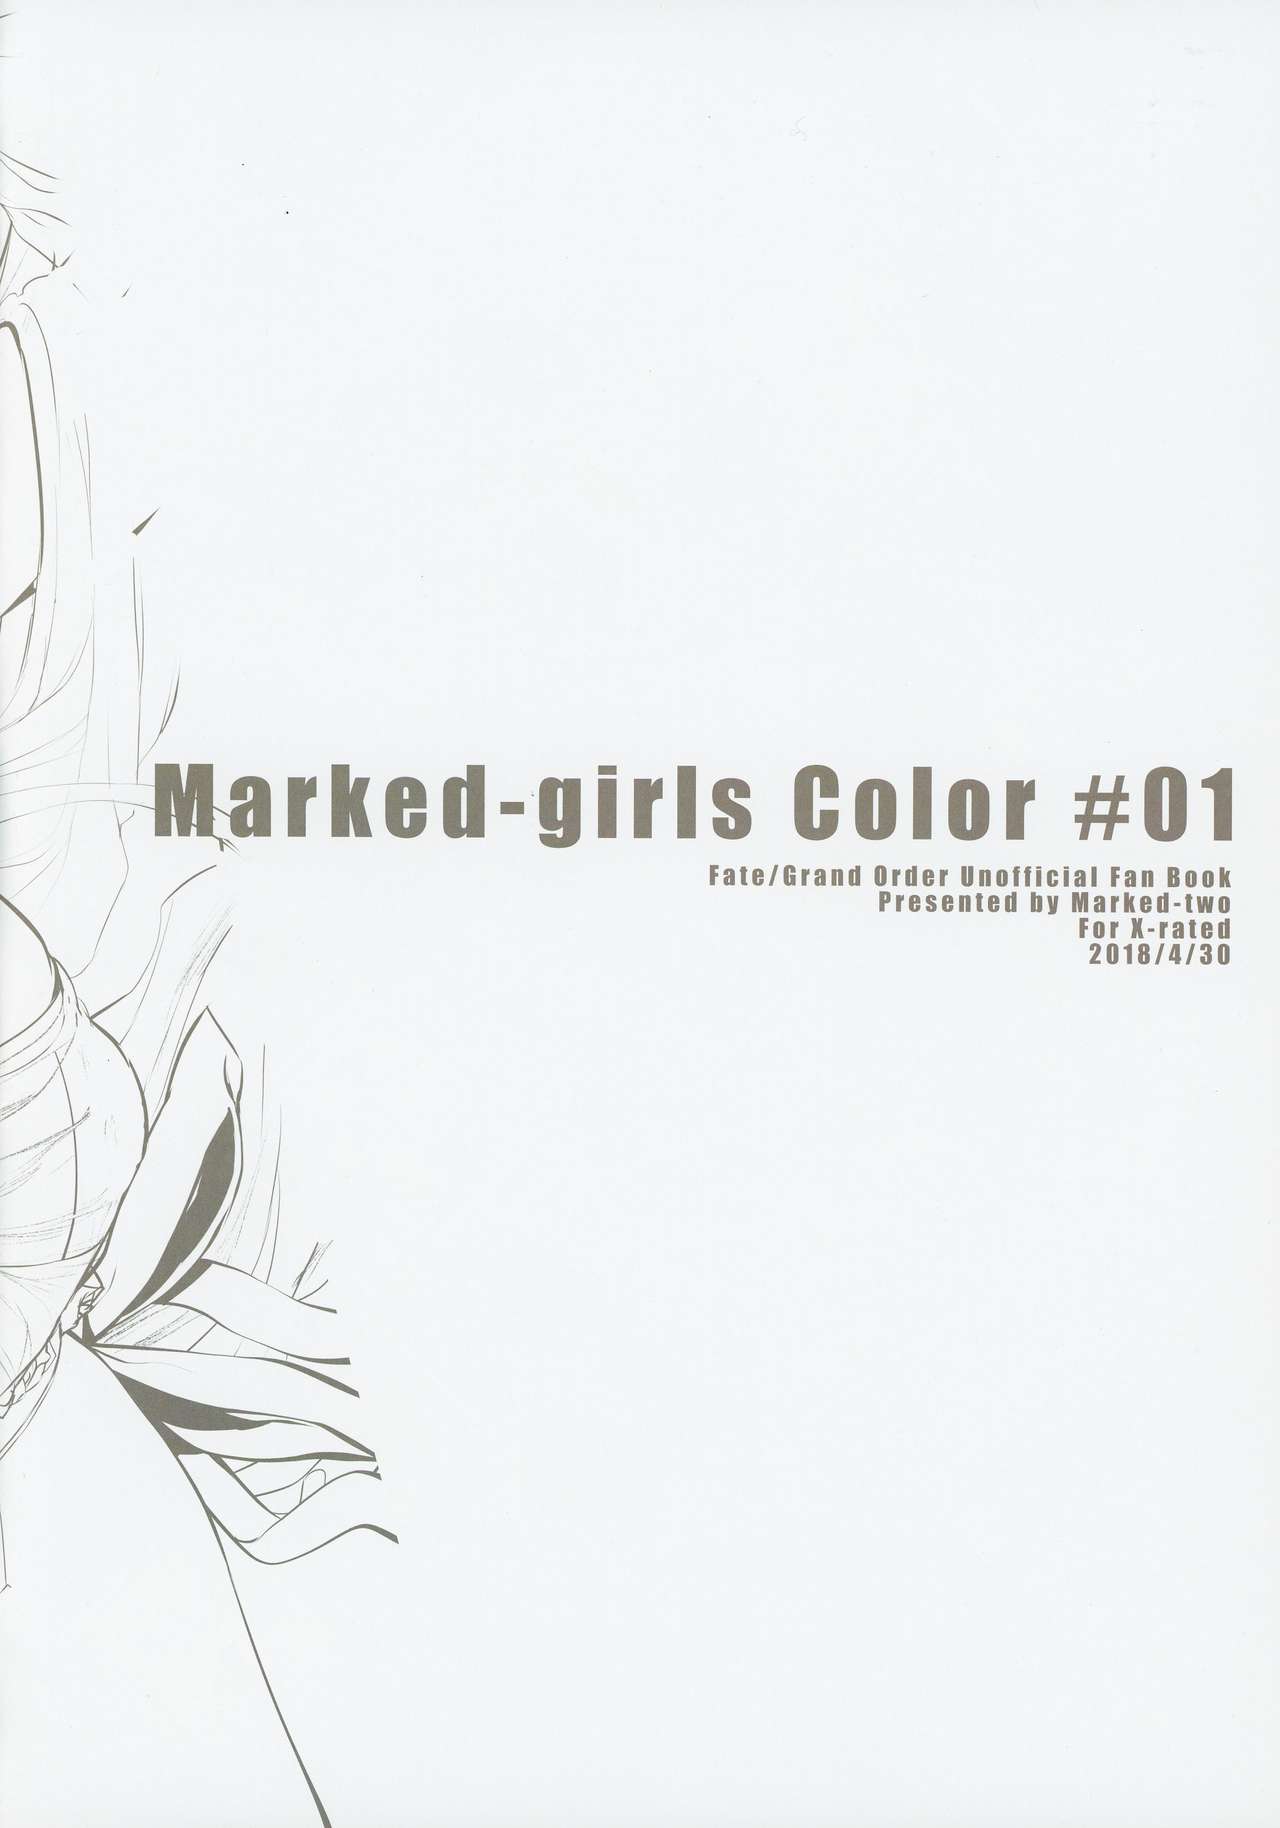 (COMIC1☆13) [Marked-two (Suga Hideo)] Marked Girls Color #01 Full Color Ban + Monochro Ban Set (Fate/Grand Order) (COMIC1☆13) [Marked-two (スガヒデオ)] Marked Girls Color #01 フルカラー版+モノクロ版セット (Fate/Grand Order)